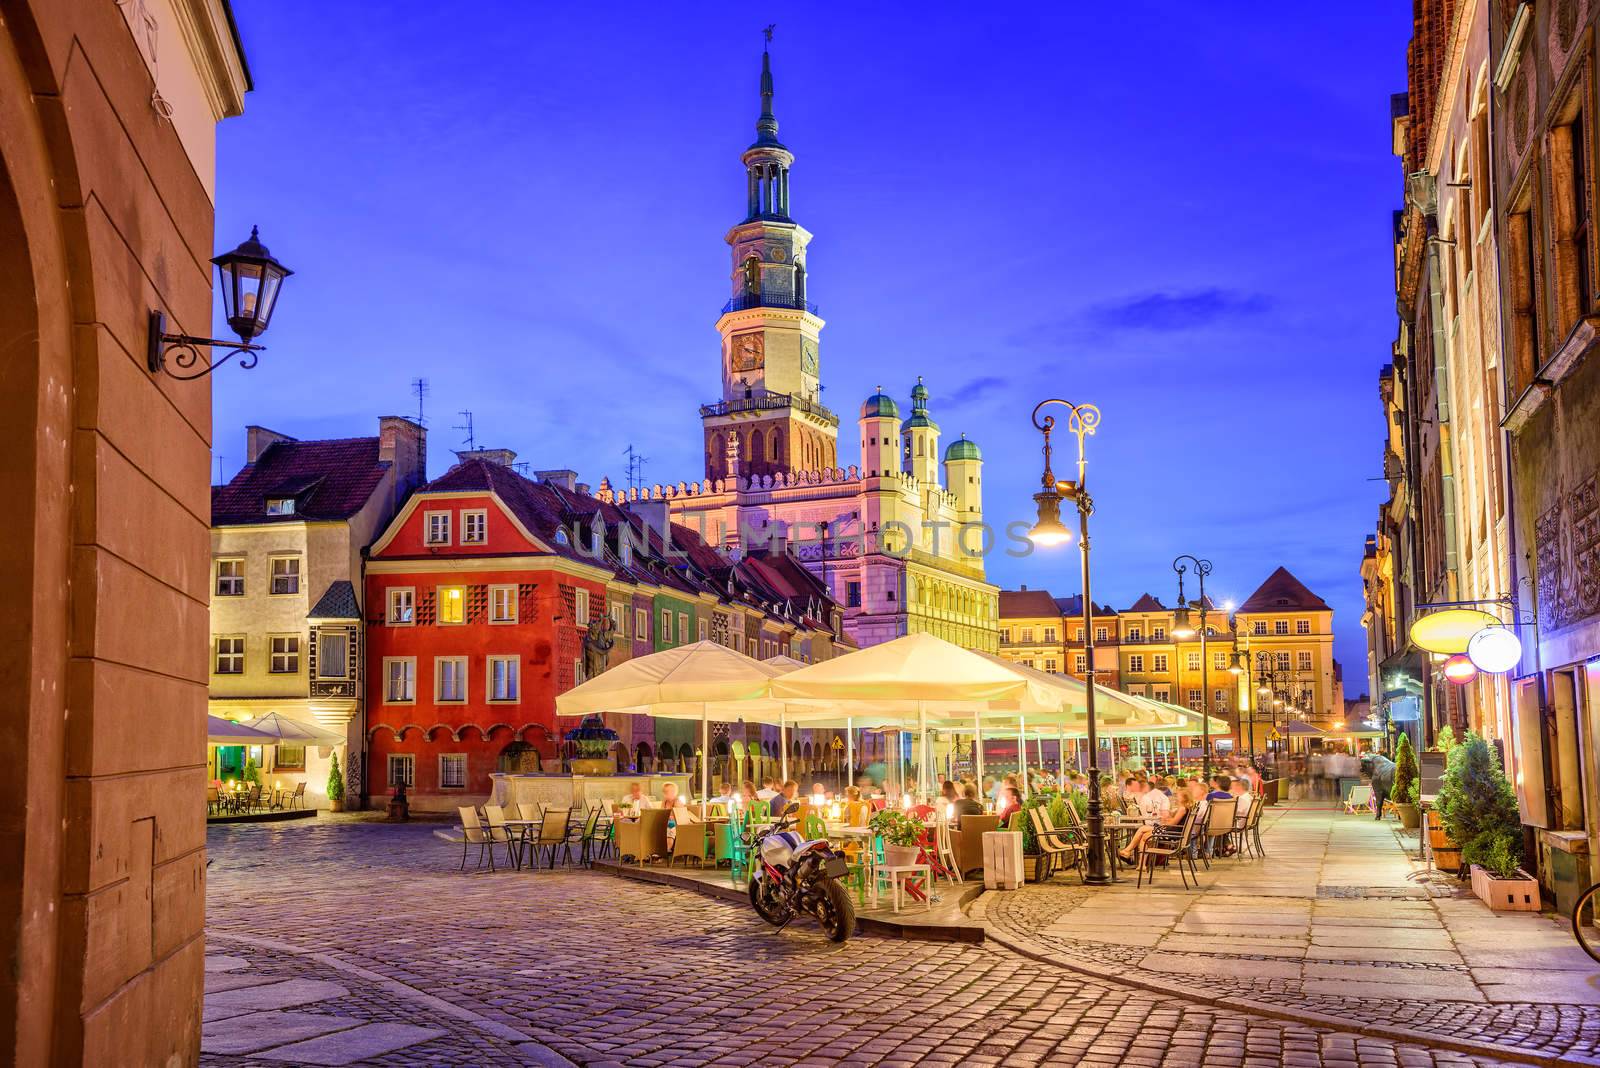 Main square of the old town of Poznan, Poland by GlobePhotos